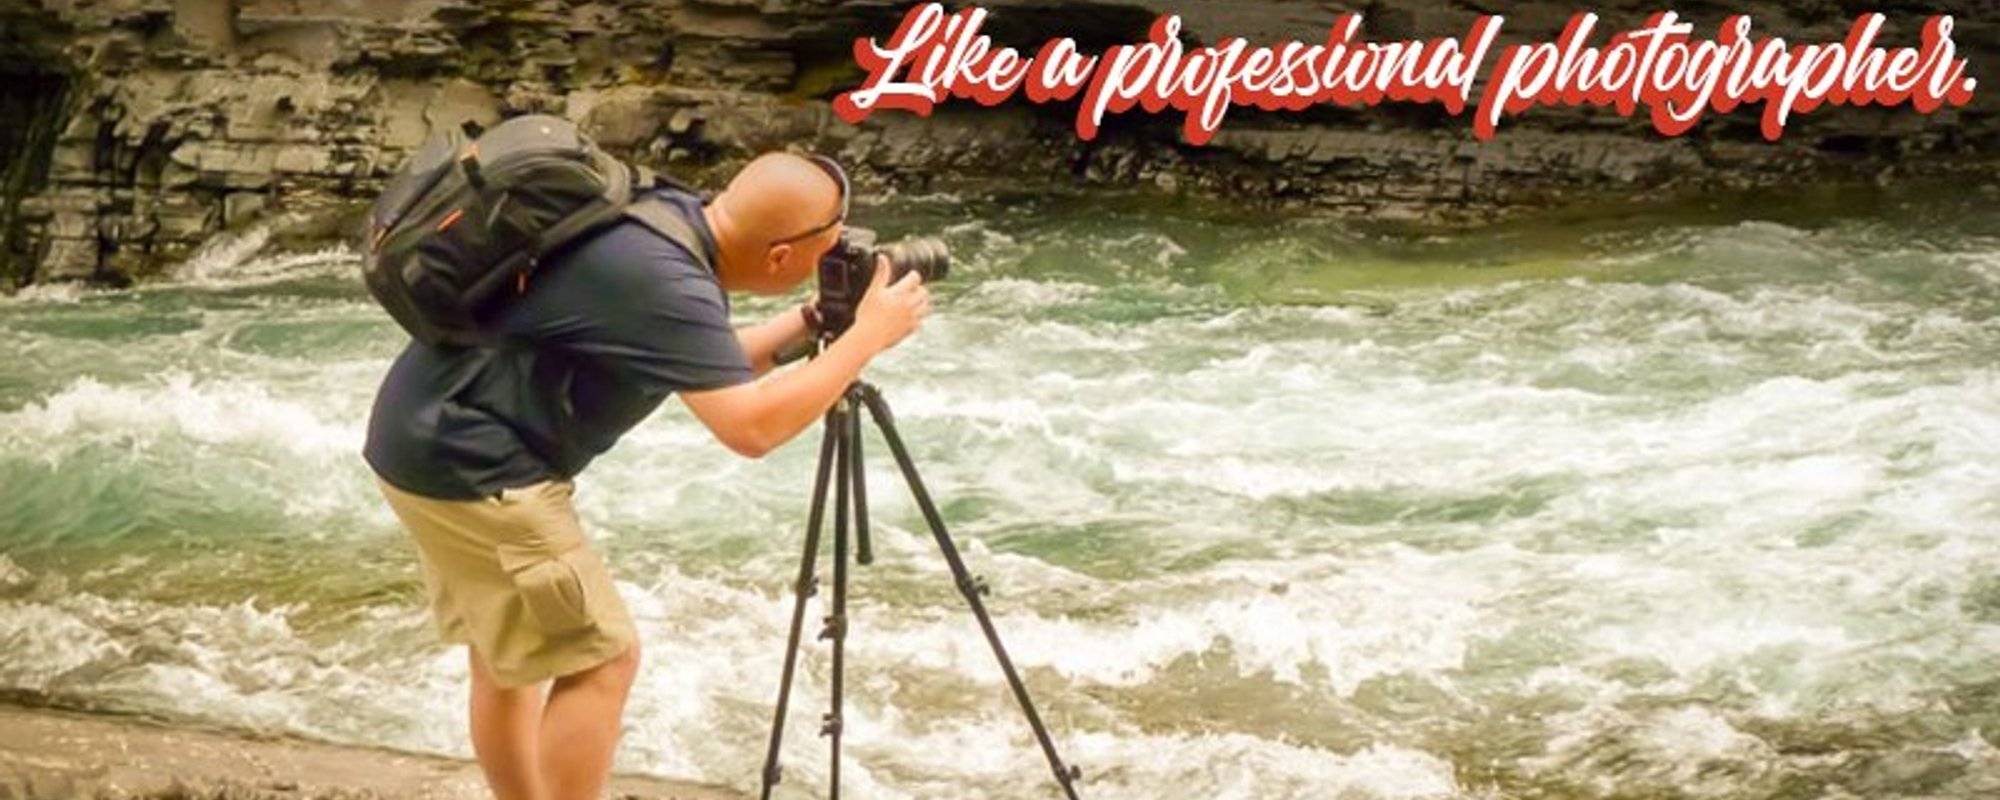 How to plan your vacation photos like a professional photographer.